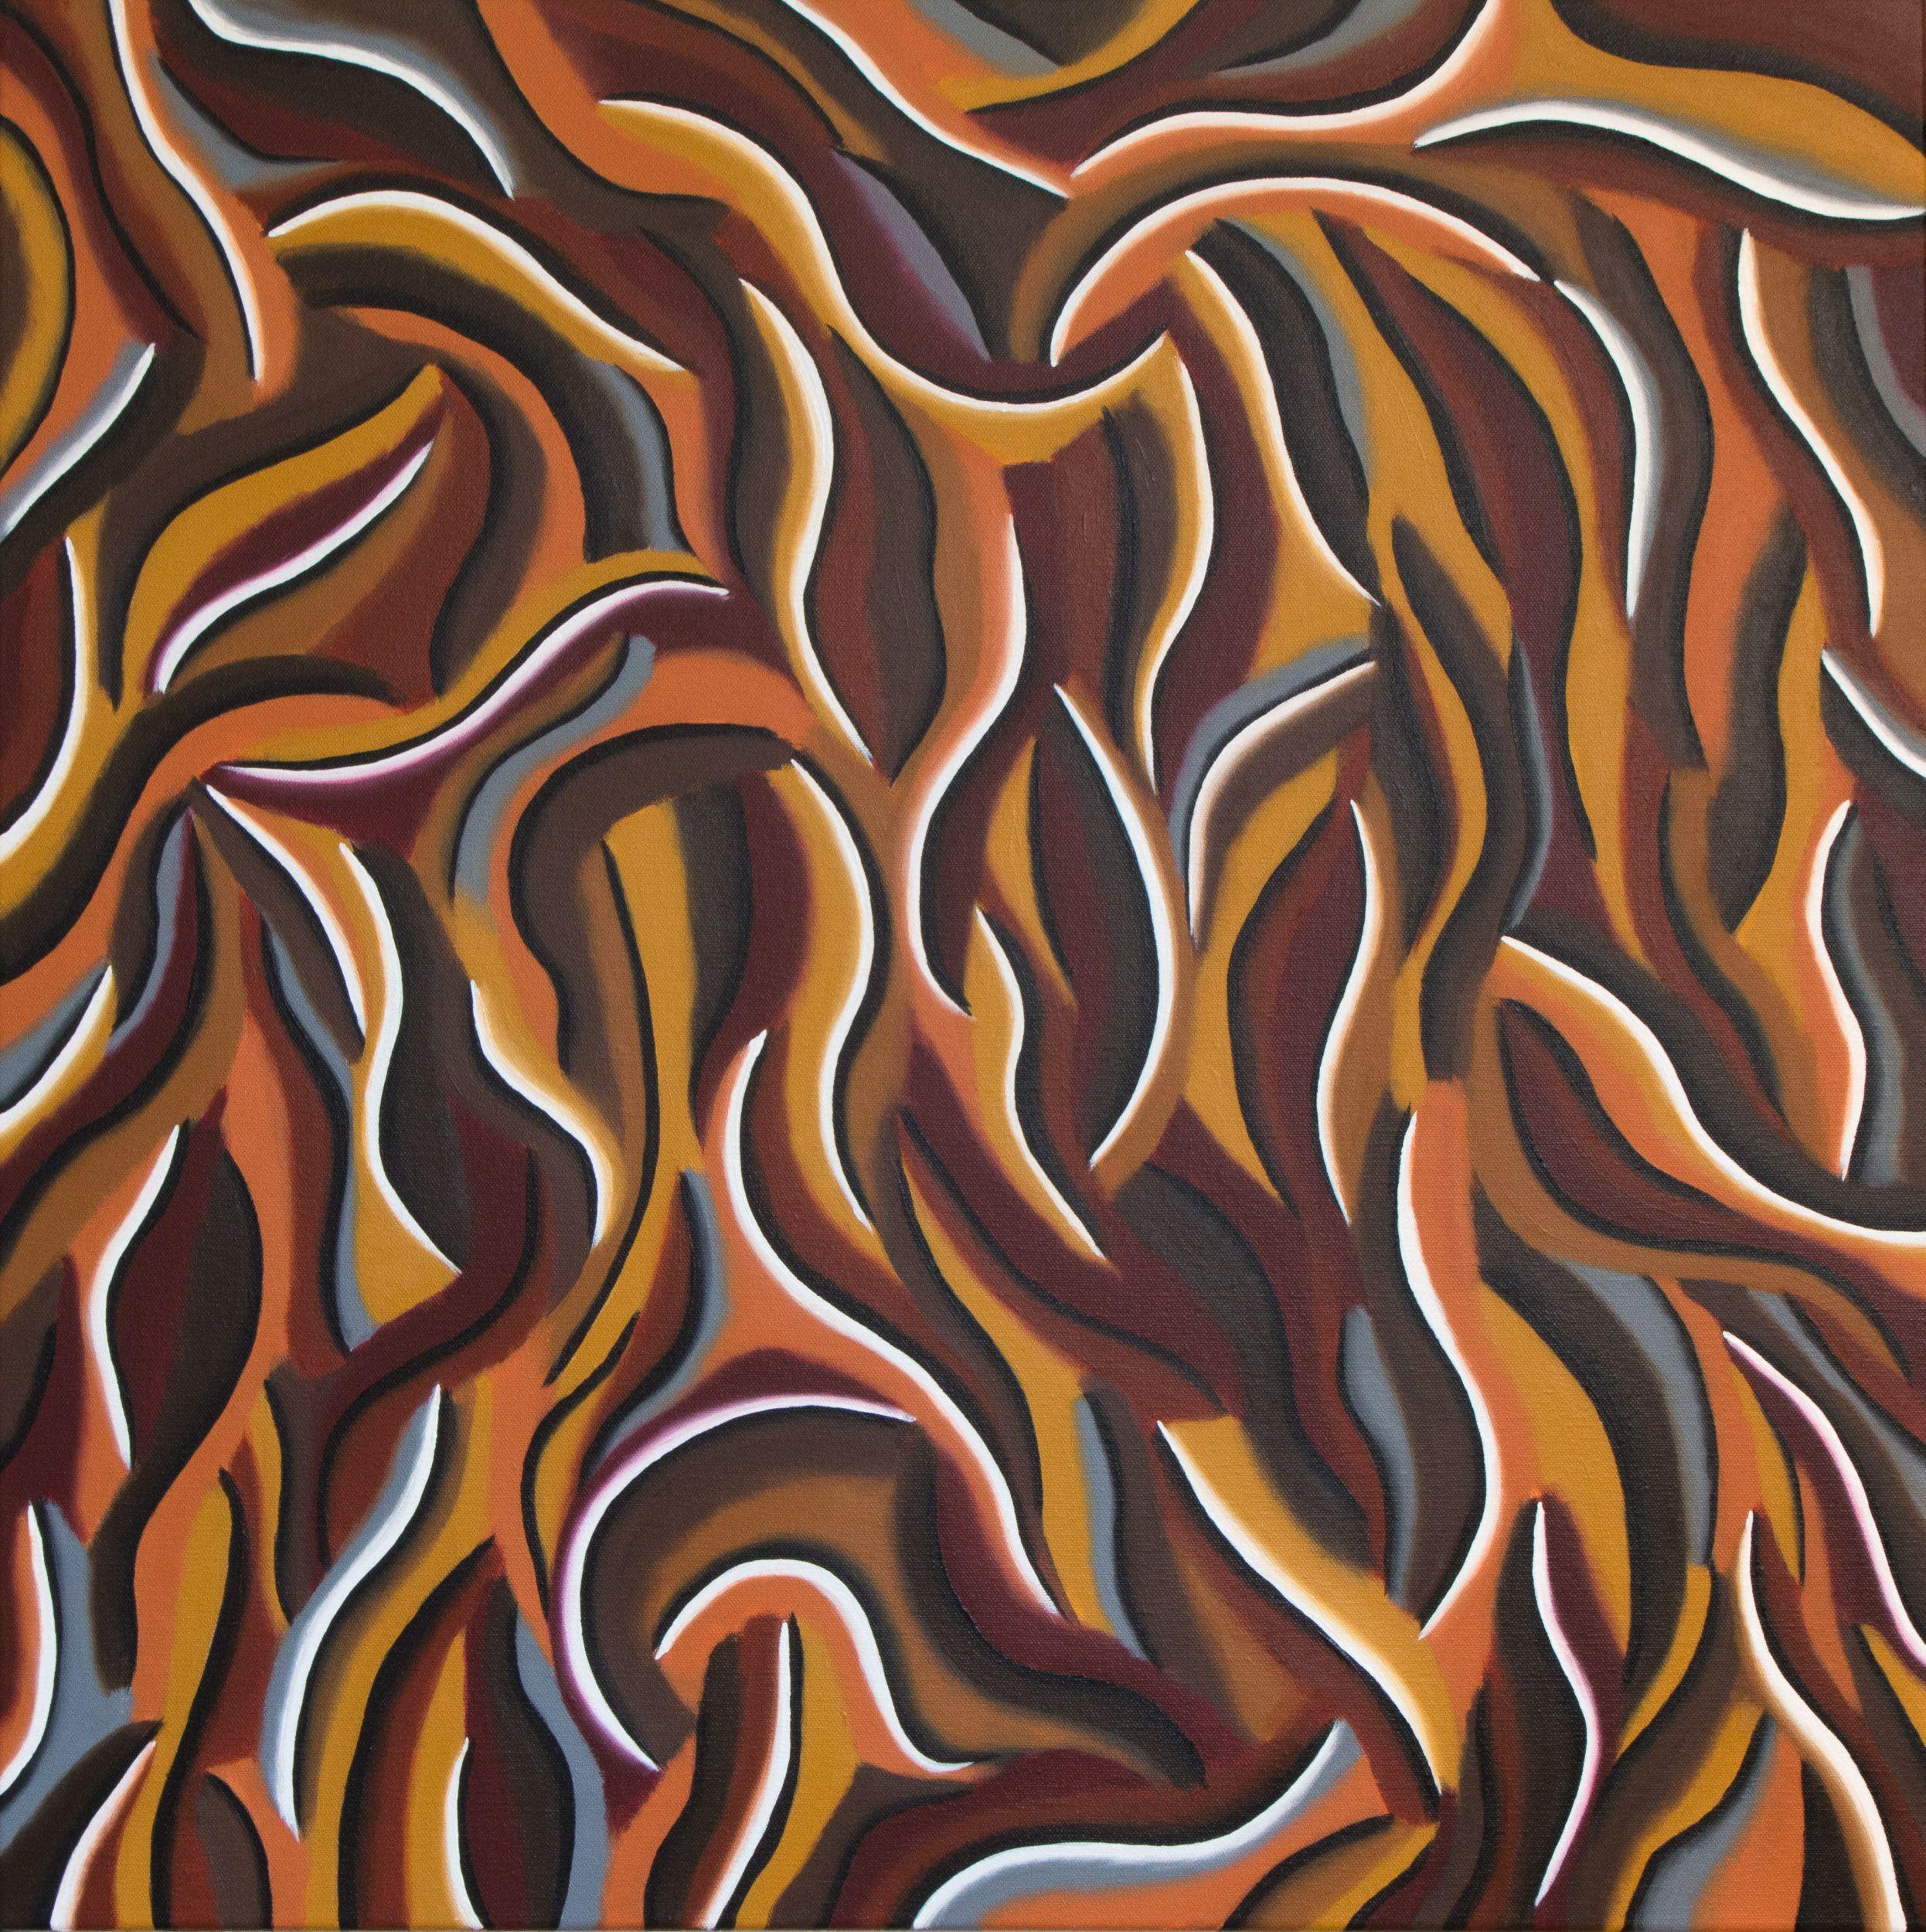 Stefan Fierros Abstract Painting - Earth rhythms  - 4, Painting, Acrylic on Canvas